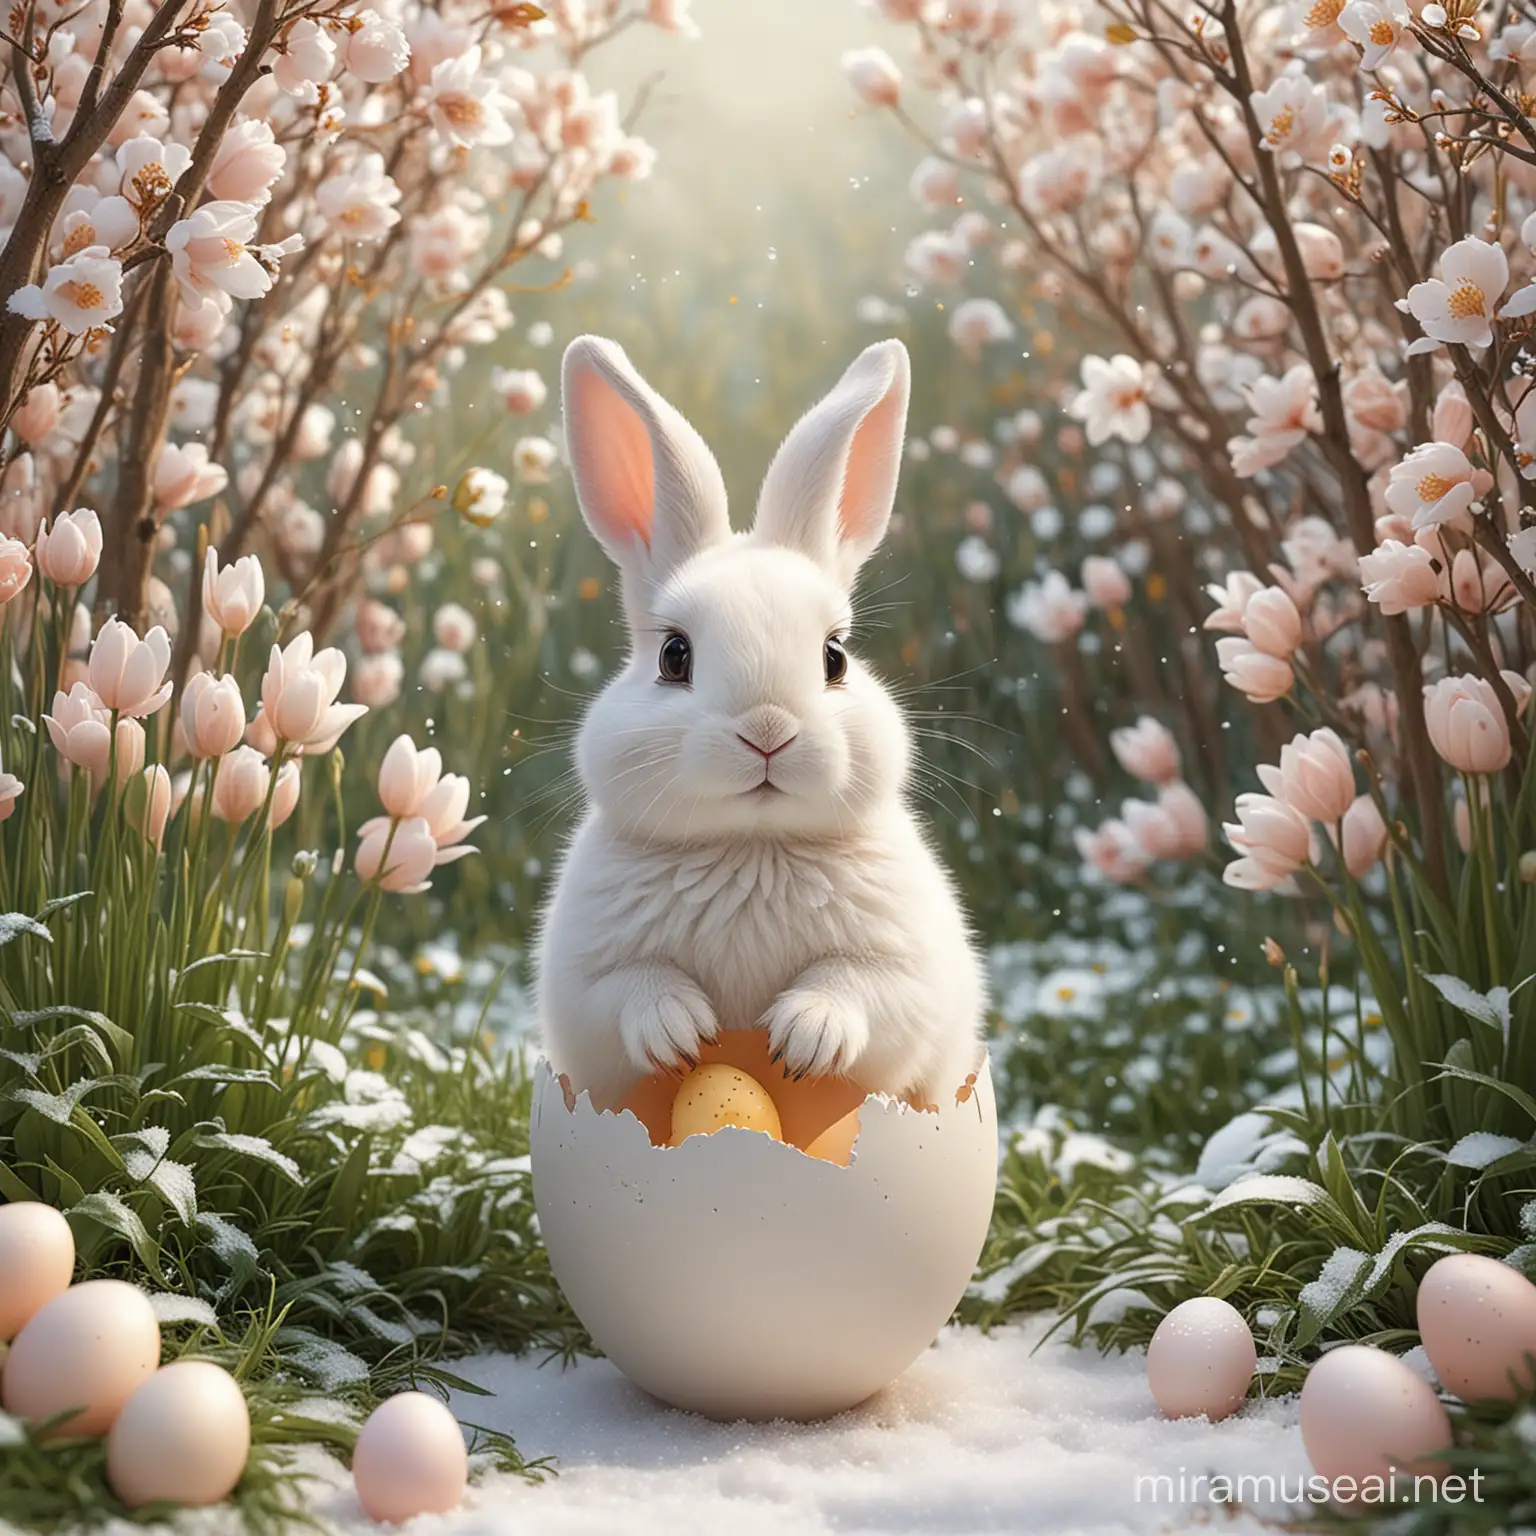 Description:
In this heartwarming illustration created with AI, we witness a scene of pure delight as a charming bunny emerges from a tiny, pastel-colored egg. The soft, gentle hues of the eggshell provide a perfect contrast to the fluffy, snow-white fur of the bunny, creating a visually captivating composition.

The bunny's large, expressive eyes are filled with curiosity and innocence, captivating the viewer's attention and evoking a sense of warmth and tenderness. Its small, twitching nose adds a touch of playfulness to the scene, as if the bunny is eagerly exploring its new surroundings.

As the bunny emerges from the egg, delicate petals and leaves surround the scene, hinting at the arrival of springtime and new beginnings. The overall atmosphere is one of joy and wonder, inviting viewers to share in the excitement of this adorable creature's first moments in the world.

Through meticulous attention to detail and expert use of AI-generated imagery, this enchanting illustration captures the essence of youth, innocence, and the beauty of new life, making it a perfect addition to any collection celebrating the magic of nature and the wonder of childhood.